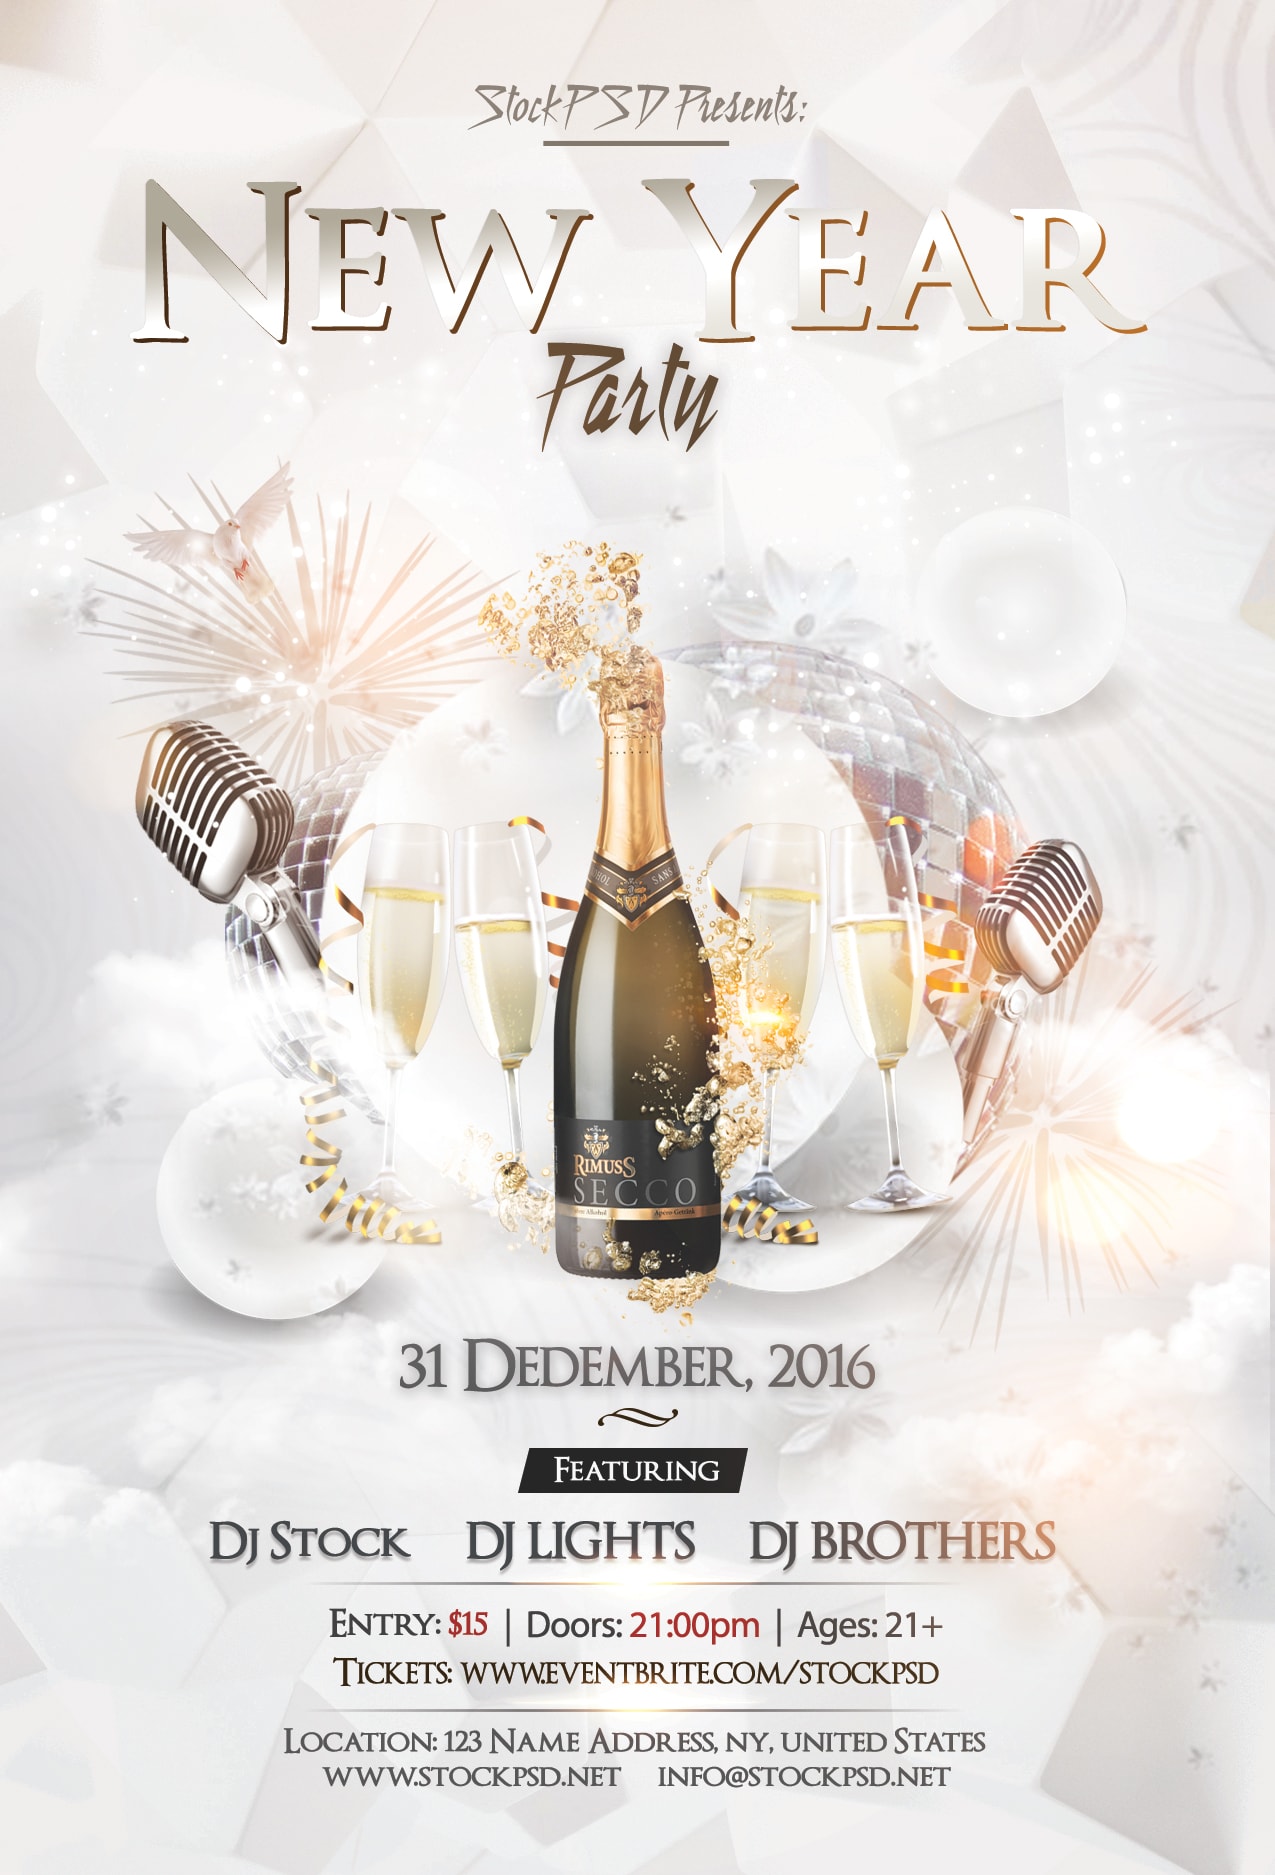 New Year Eve Party PSD Free NYE Flyer Template PSDFlyer